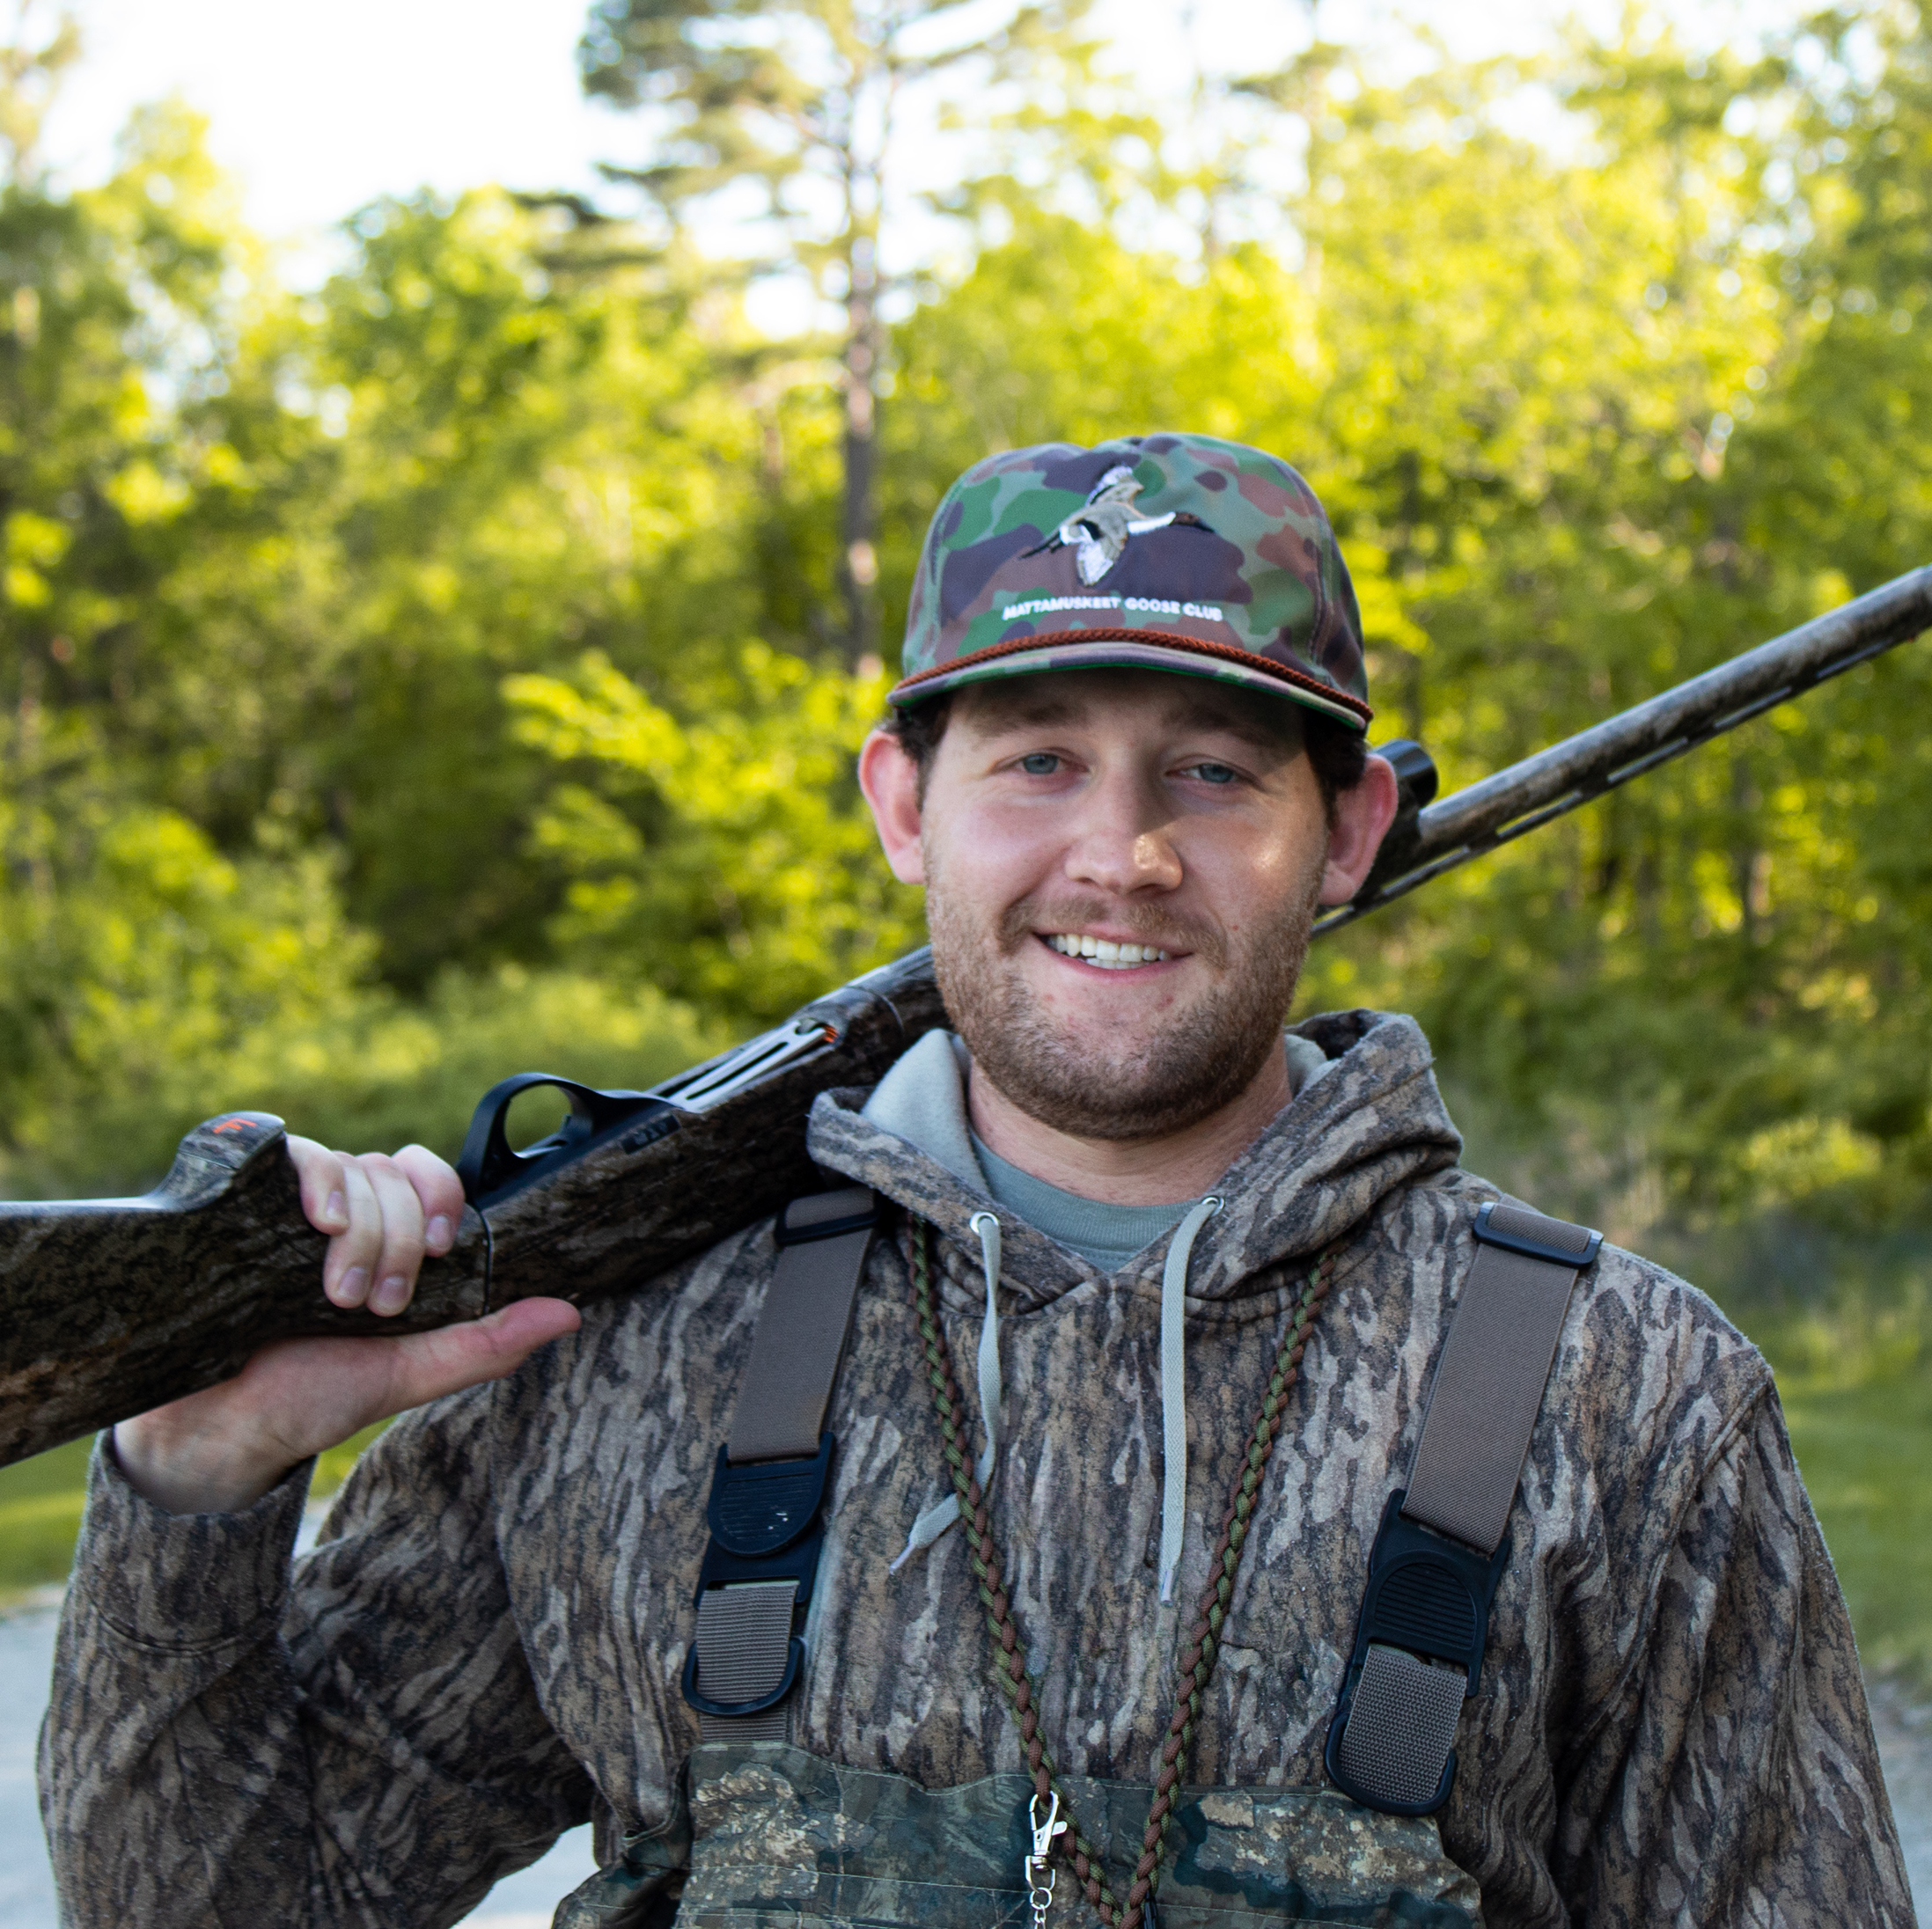 From Field to Fashion: Embracing the Southeastern Sporting Tradition with Stylish Hunting Apparel